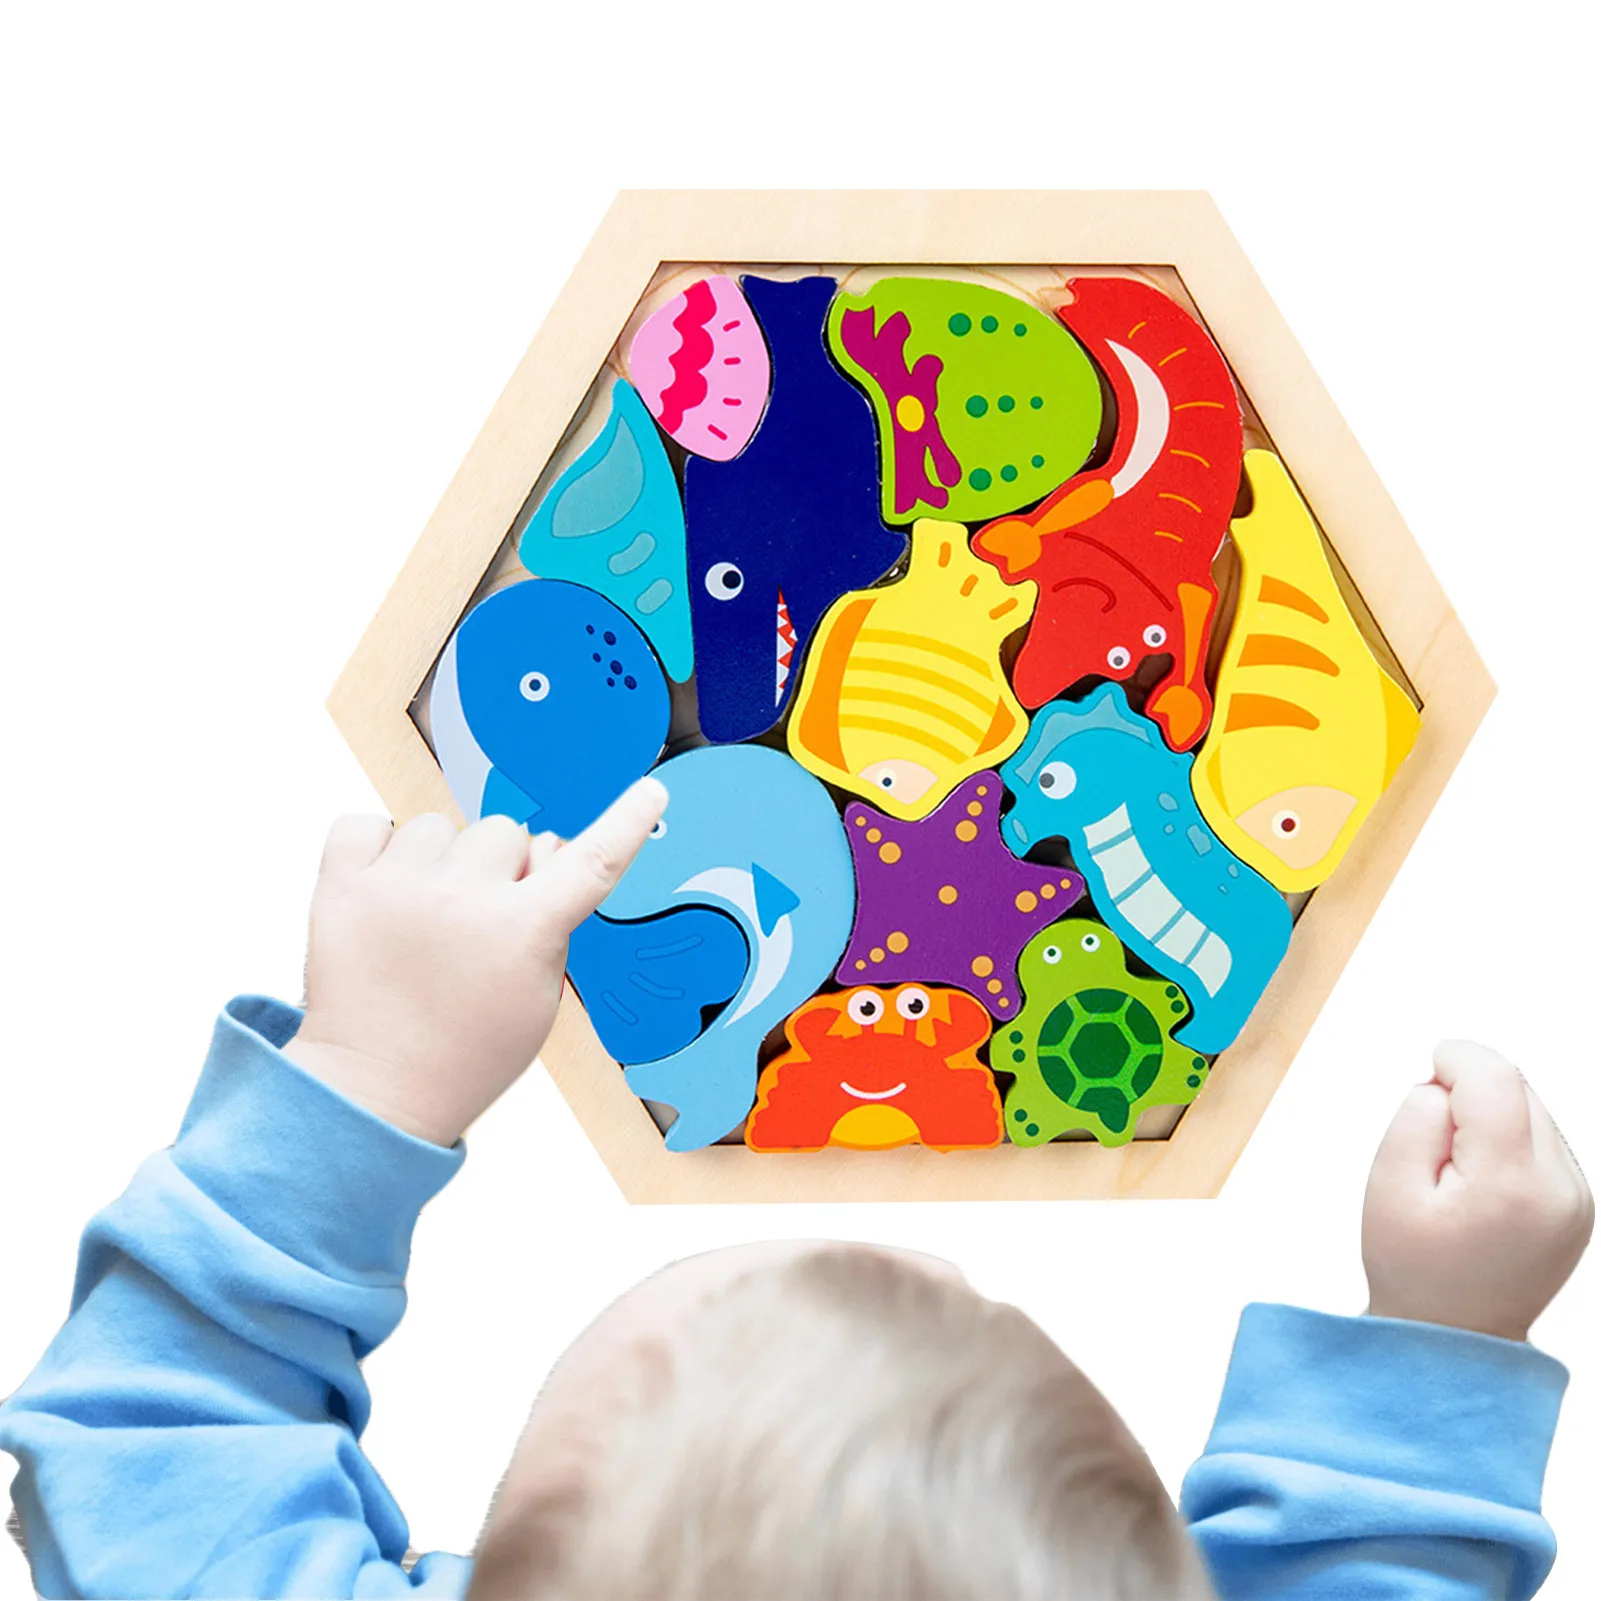 Cartoon Blocks Toddler Jigsaw Puzzles For Toddler Wooden Puzzles With And Burr-free For Toddler Educational Developmental Toys